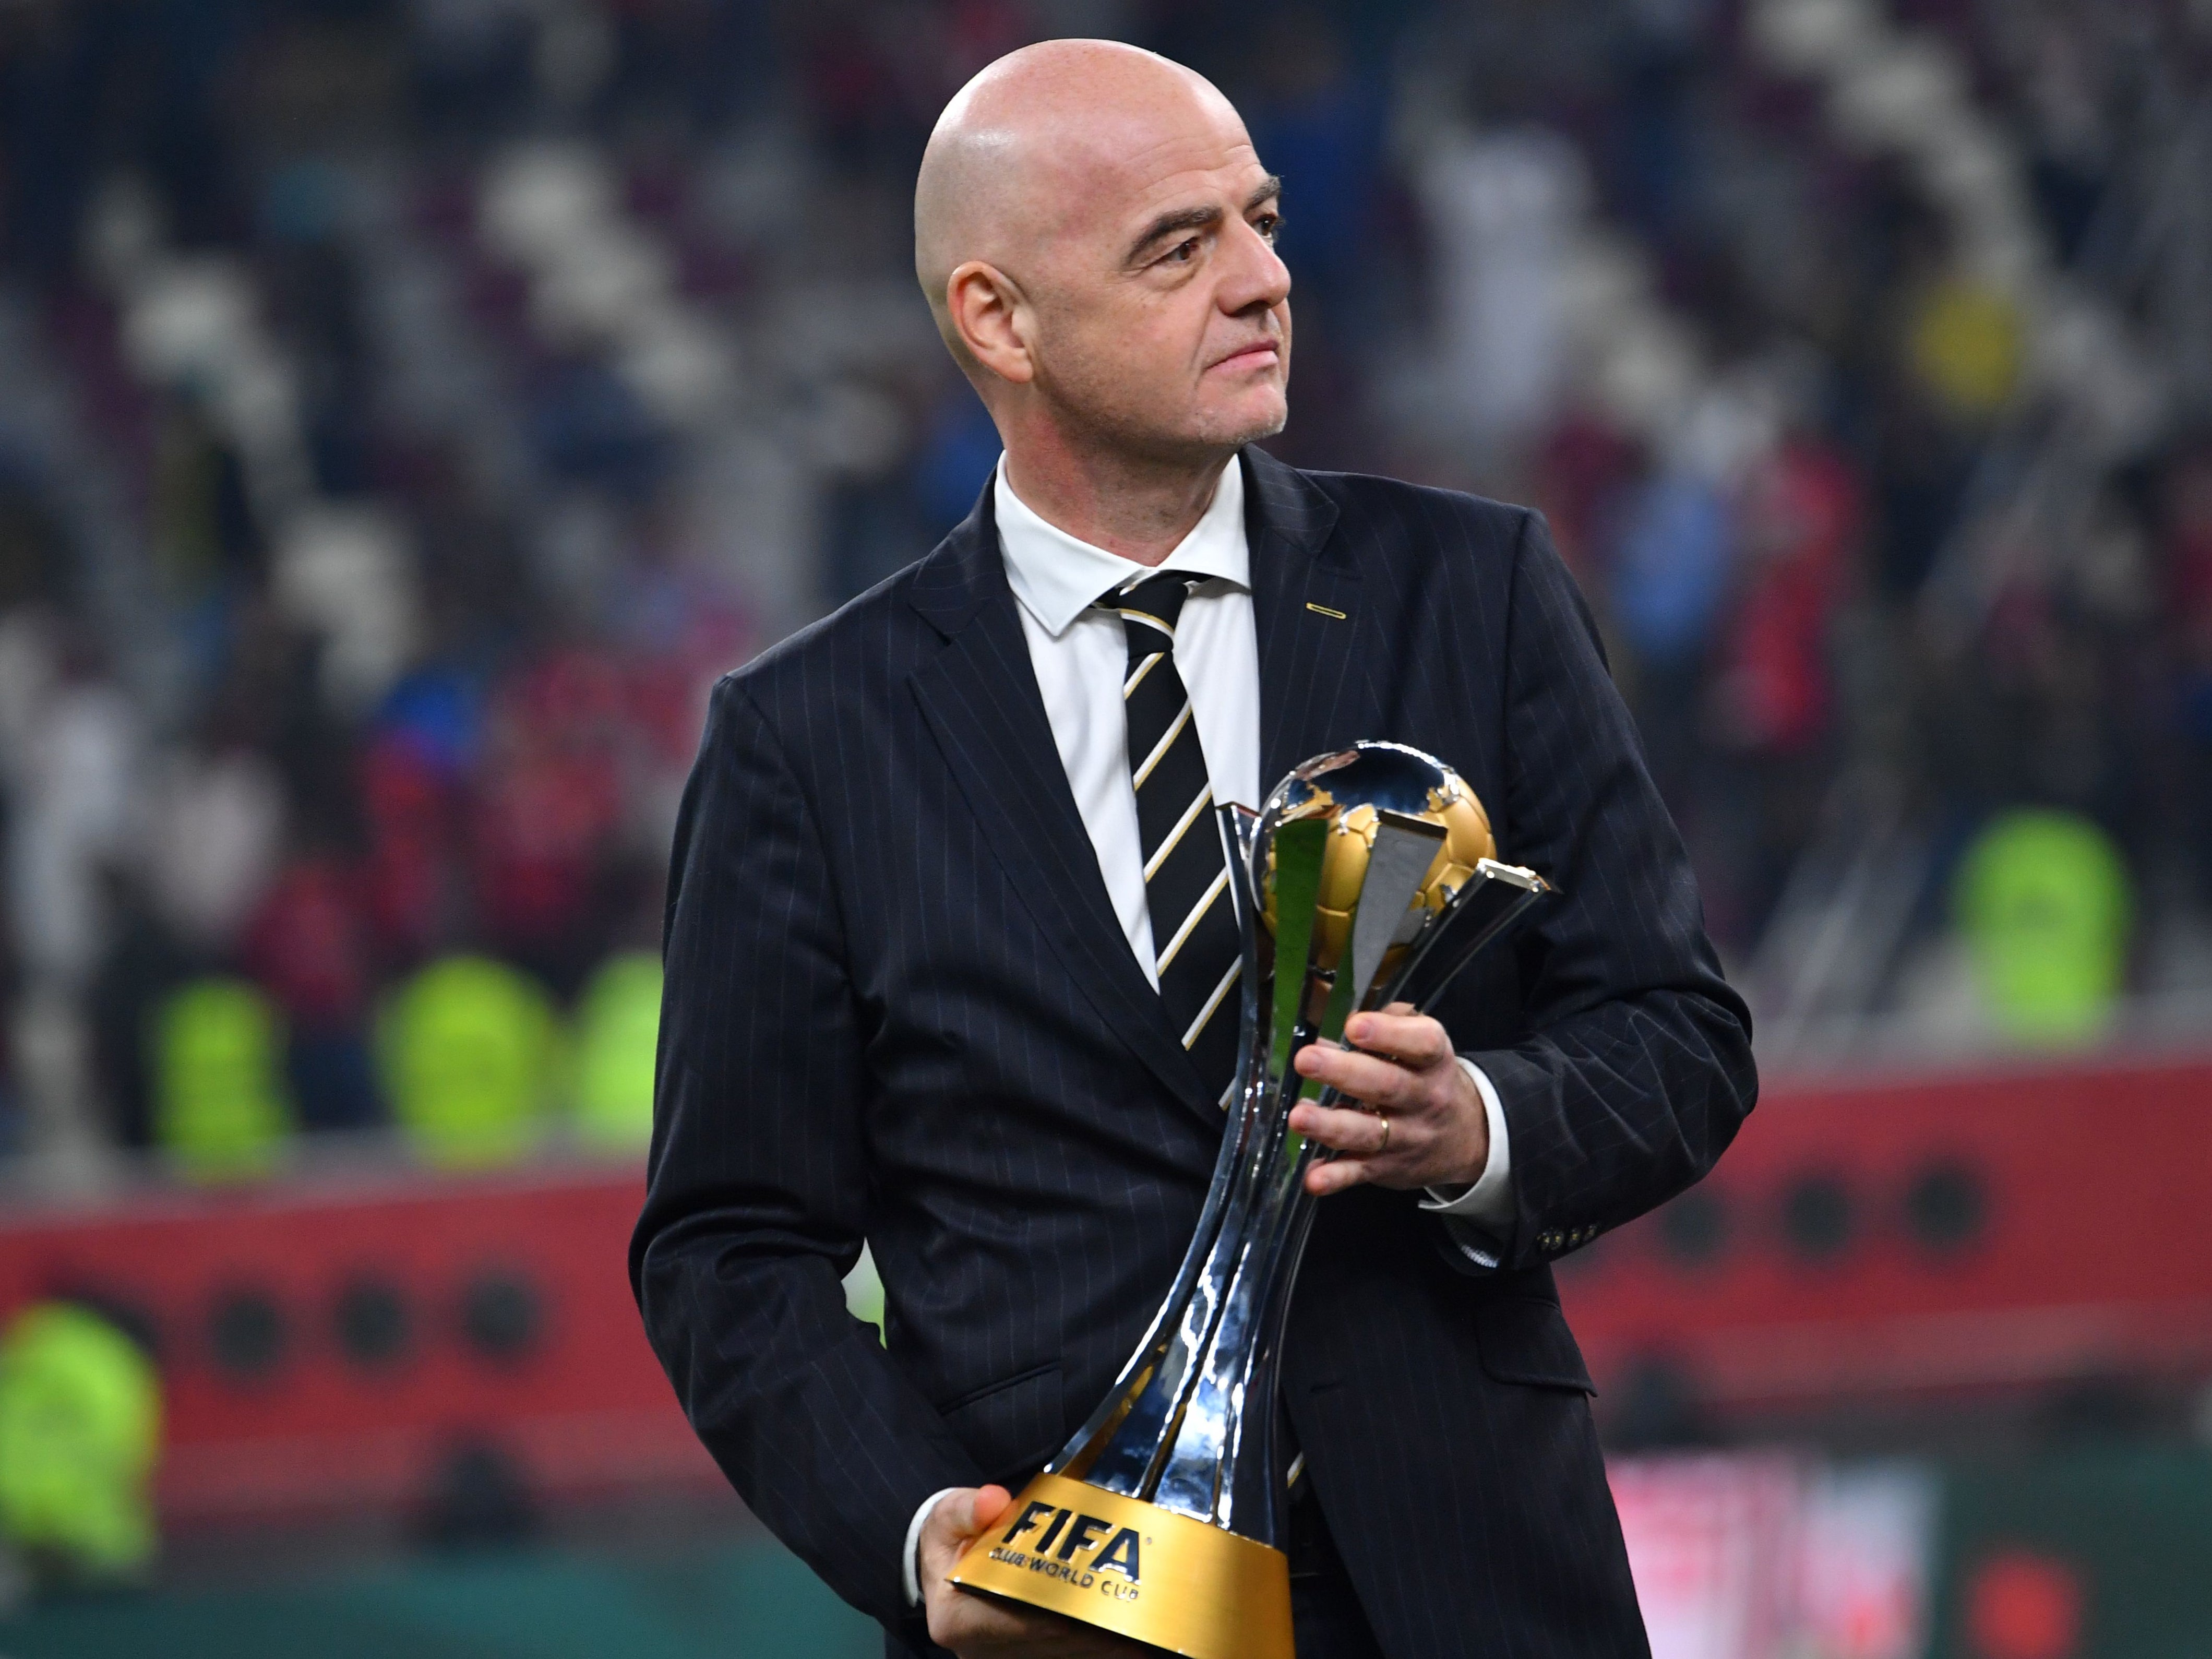 Fifa president Gianni Infantino with the Club World Cup trophy